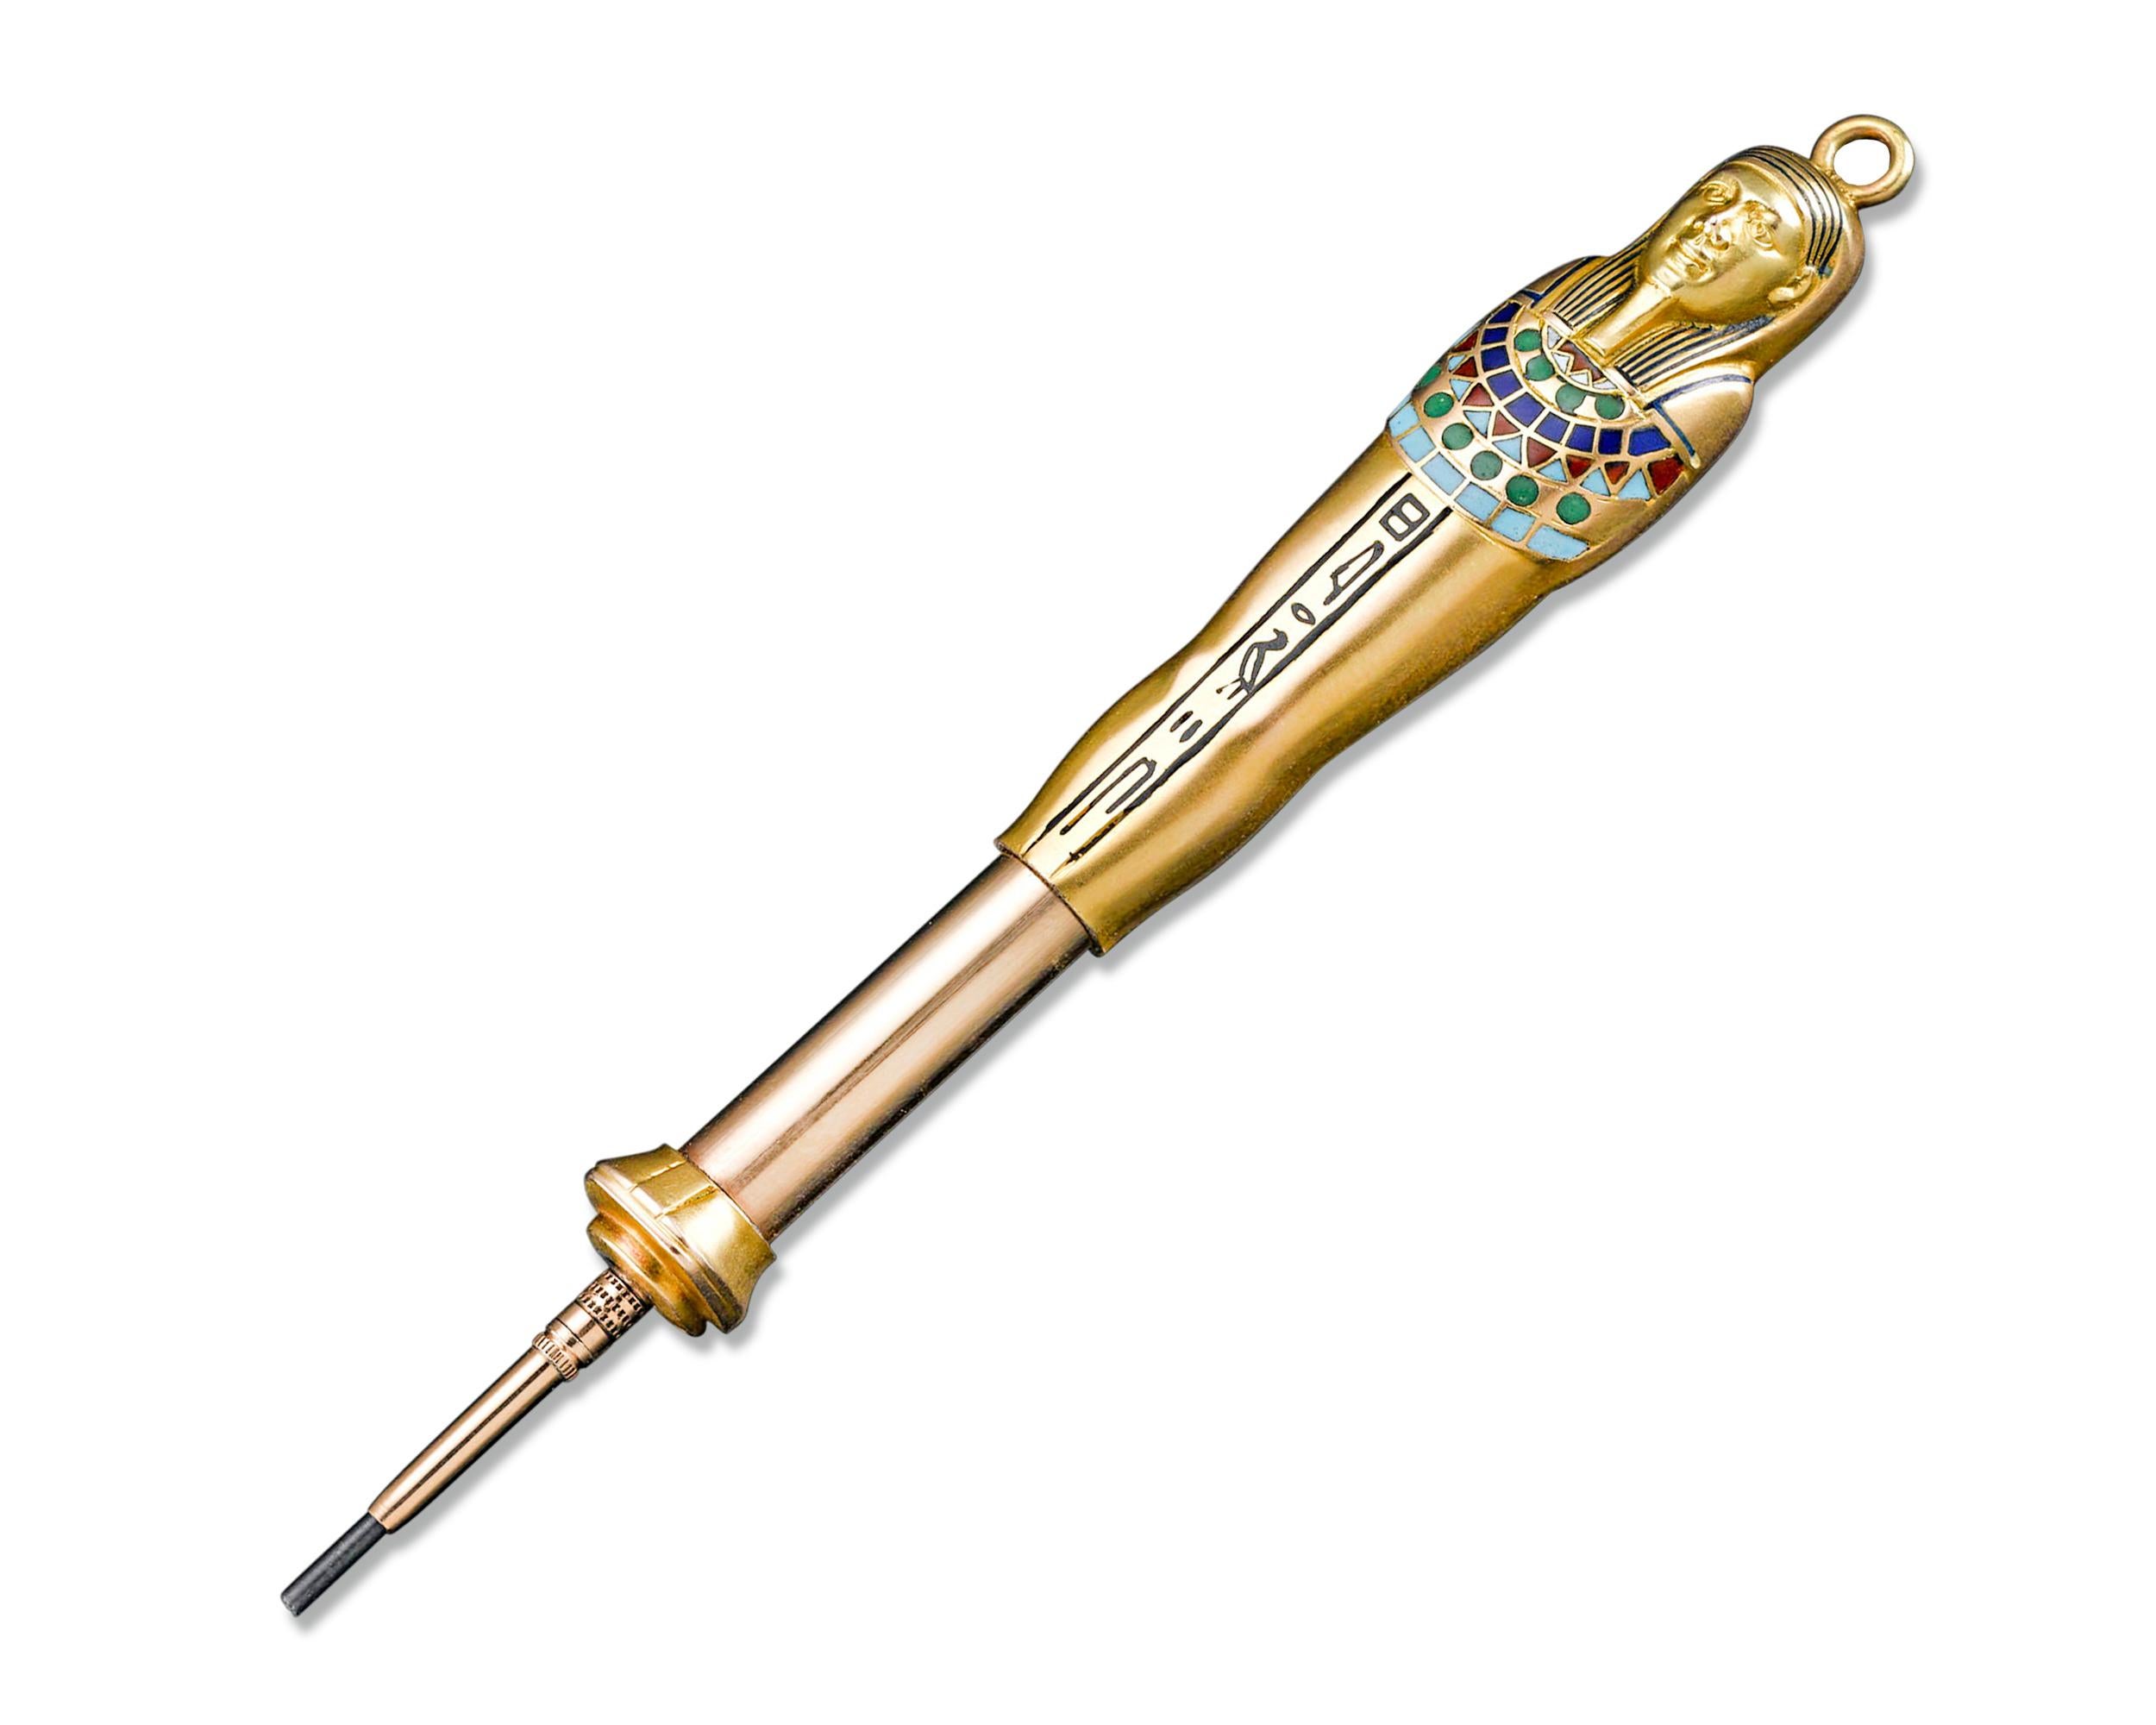 This diminutive Egyptian Revival era gold mechanical pencil takes the form of an Egyptian sarcophagus. Wonderful, natural hardstone inlay and enameled hieroglyphs add elegance and history to this fascinating writing instrument. An attached bail